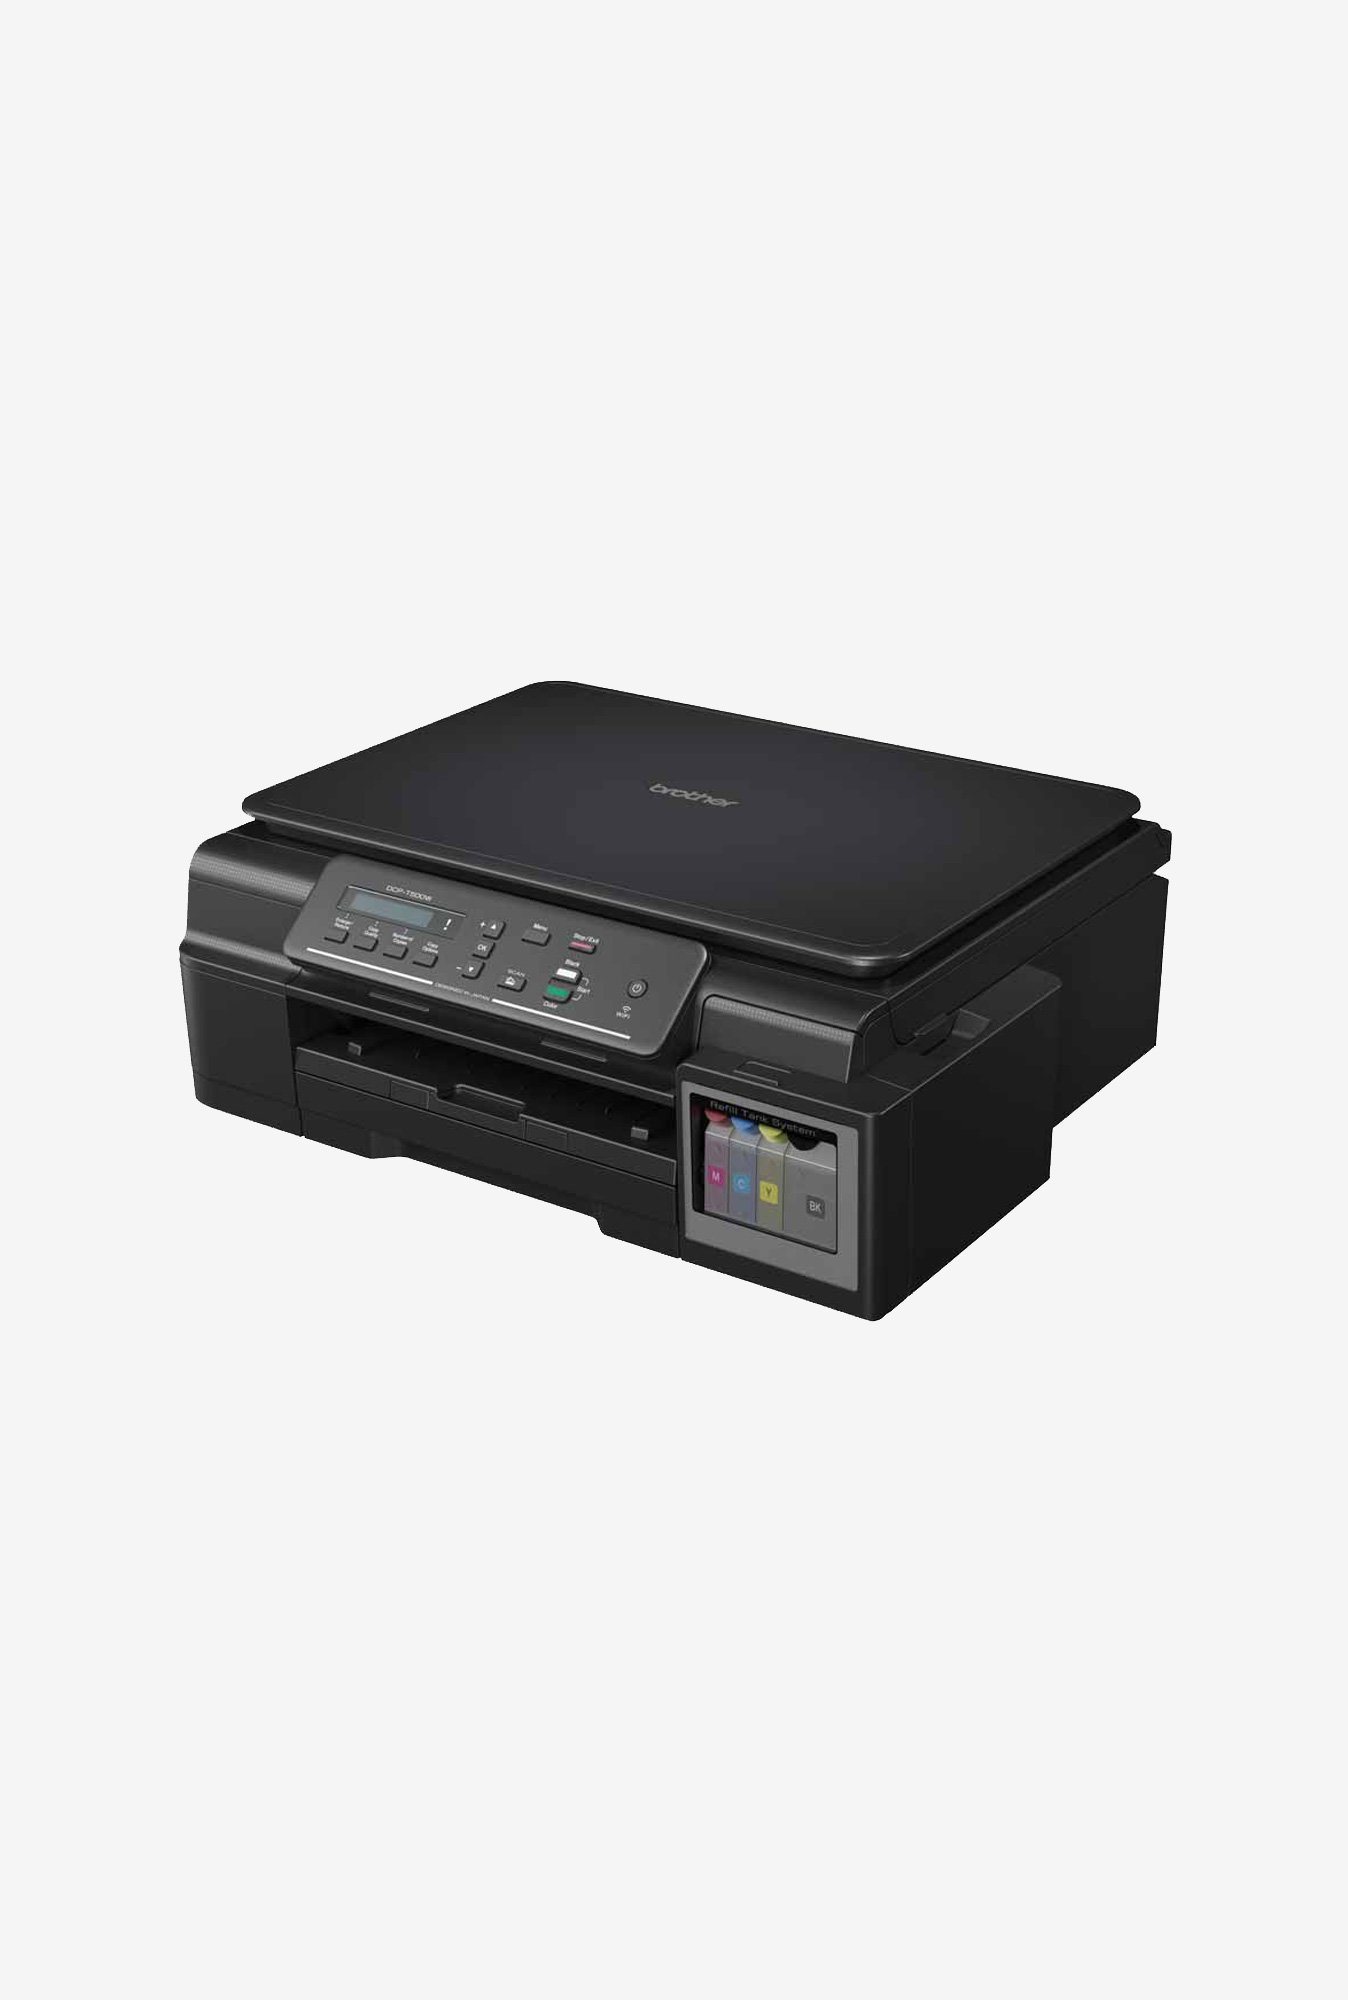 Buy Brother Dcp T500w Multi Function Printer Black Online At Best Prices Tata Cliq